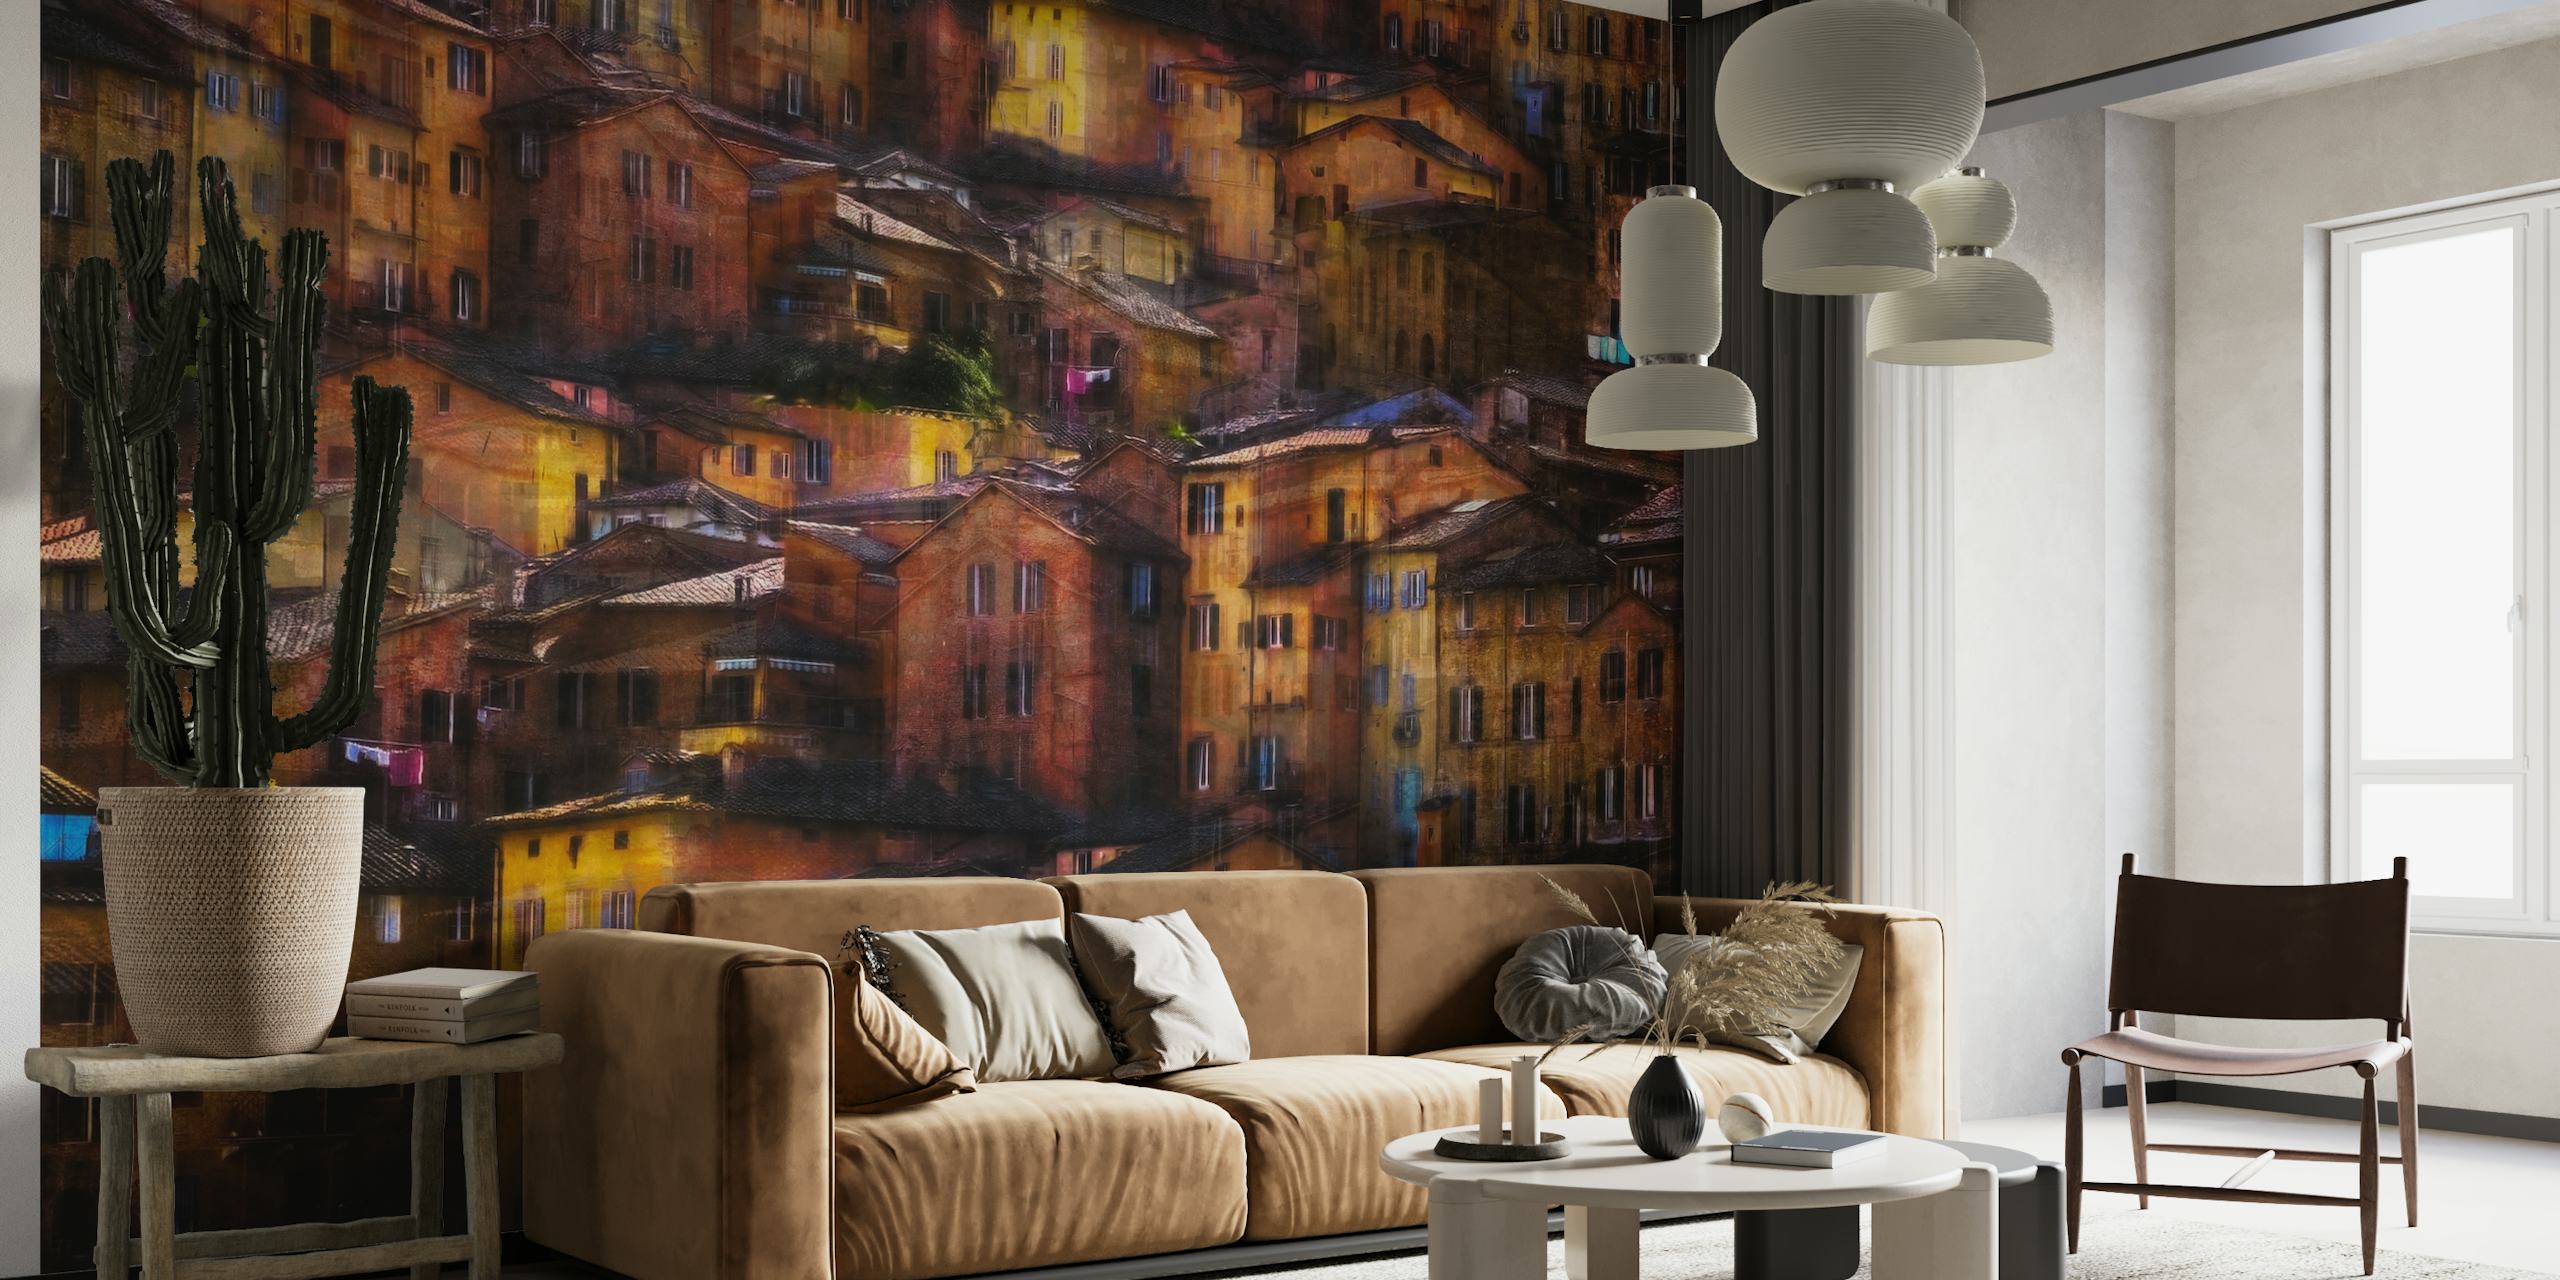 Rustic hillside village wall mural with warm tones